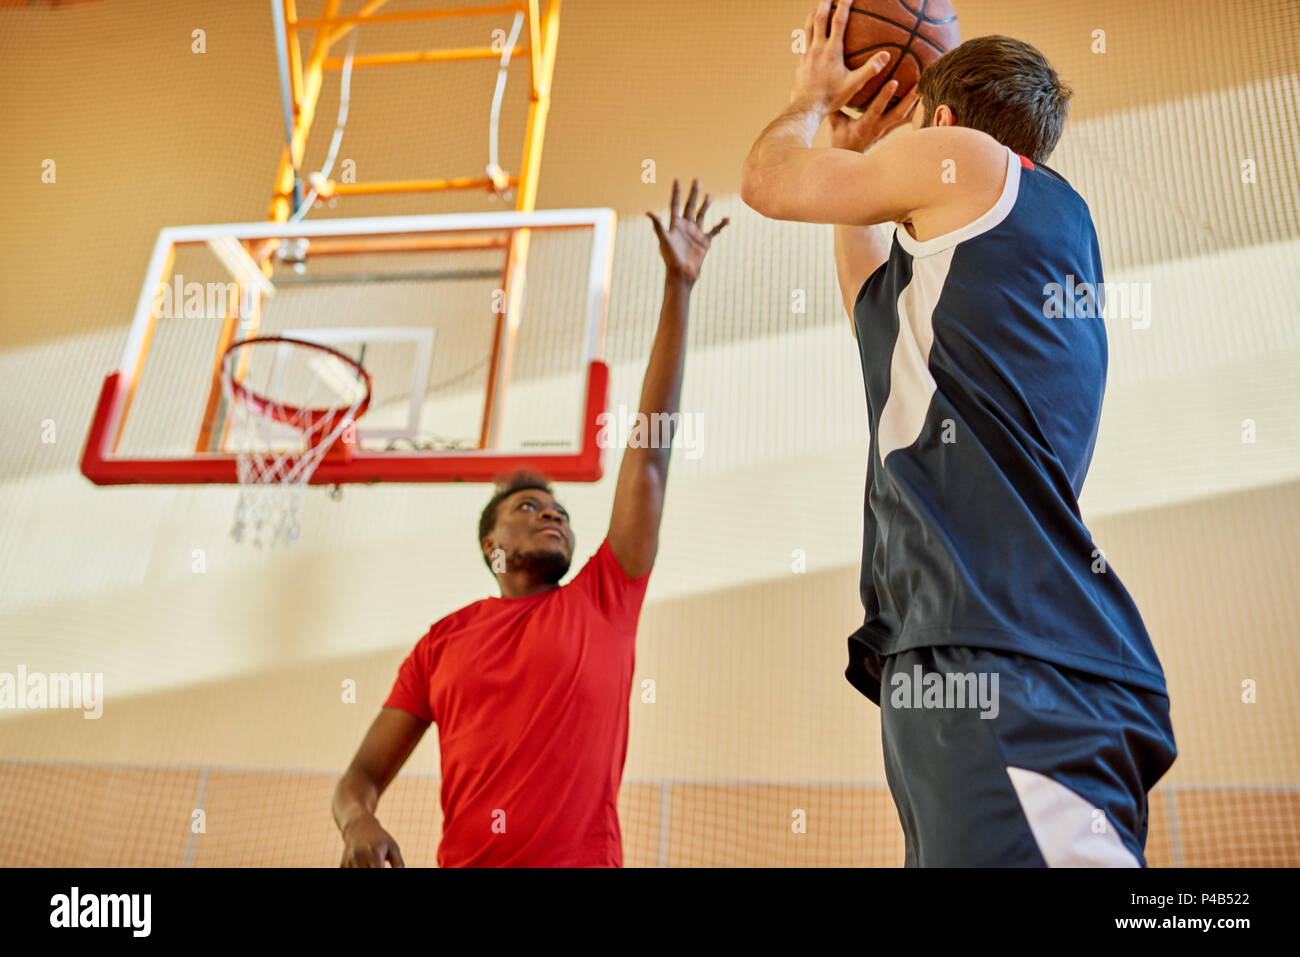 Two men playing basketball in gym Stock Photo